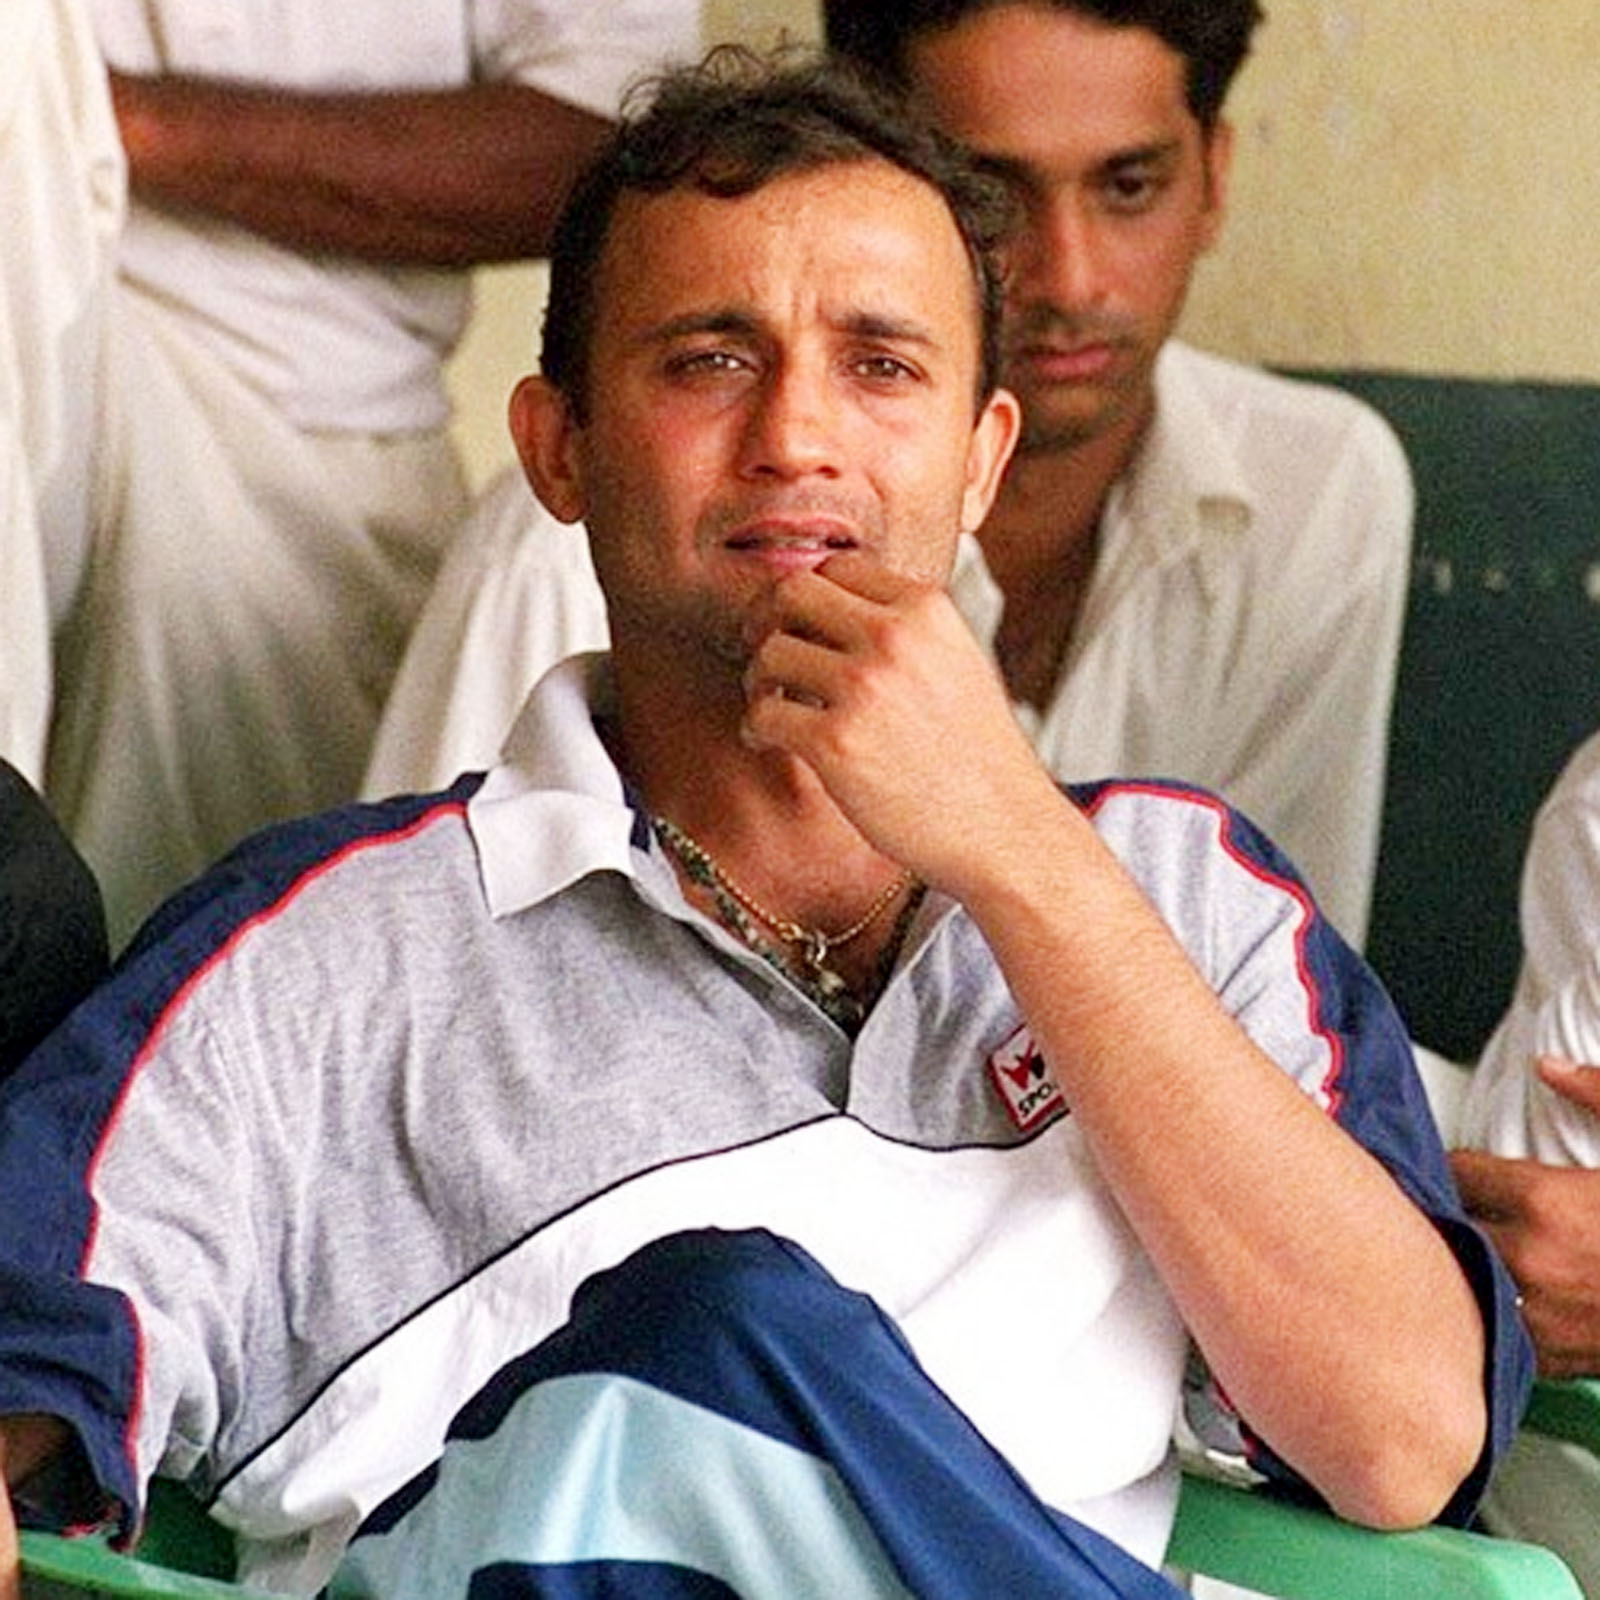 Nayan Mongia confirmed to India Today that he will apply for selectors' post | Twitter